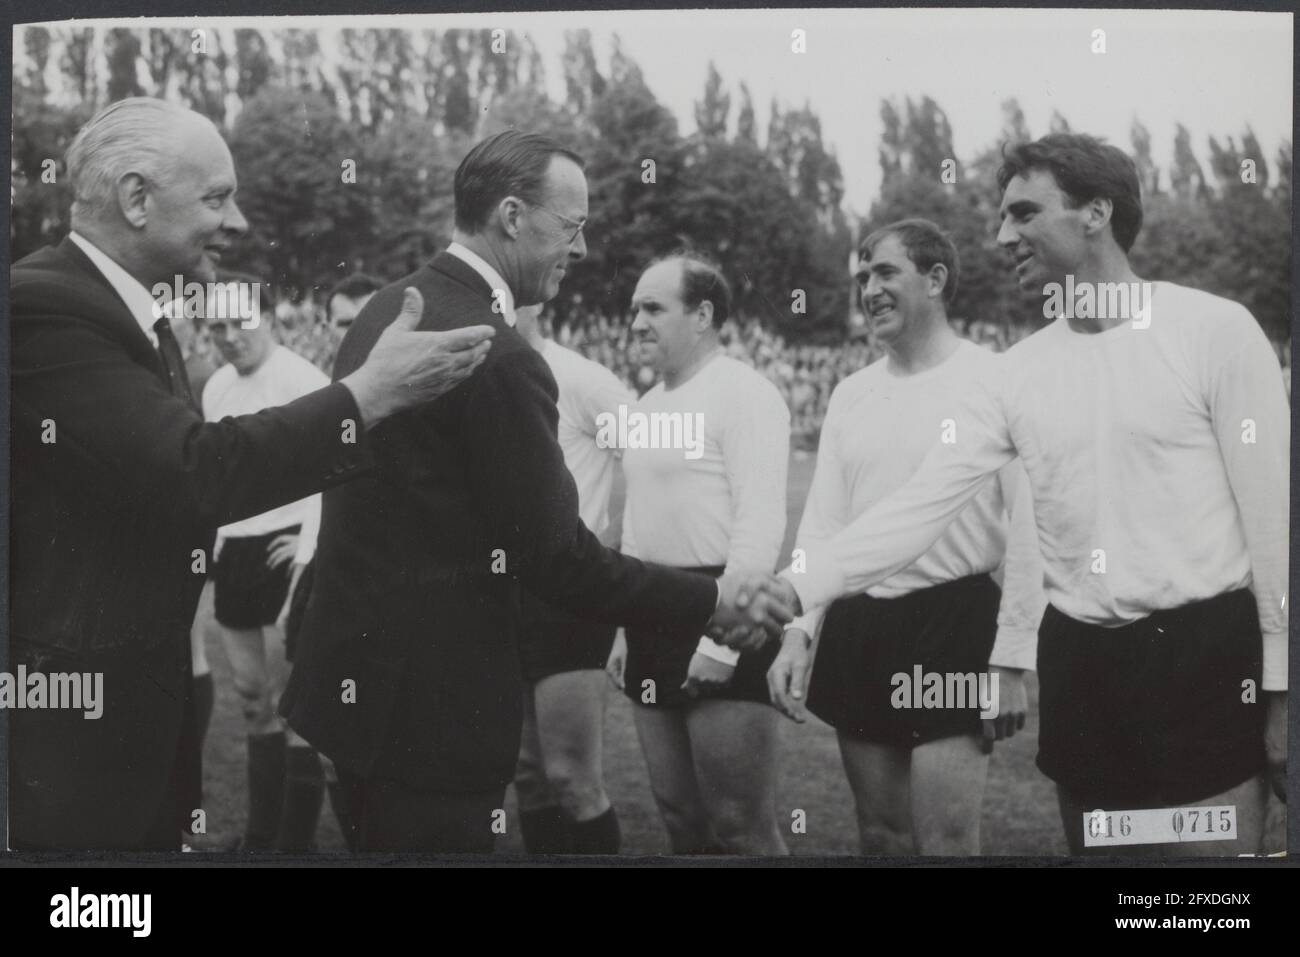 sport, royal house, princes, soccer, congratulations, Bernhard,prince, Saward, Tetzner, H., 22 May 1965, congratulations, royal house, princes, sport, soccer, The Netherlands, 20th century press agency photo, news to remember, documentary, historic photography 1945-1990, visual stories, human history of the Twentieth Century, capturing moments in time Stock Photo